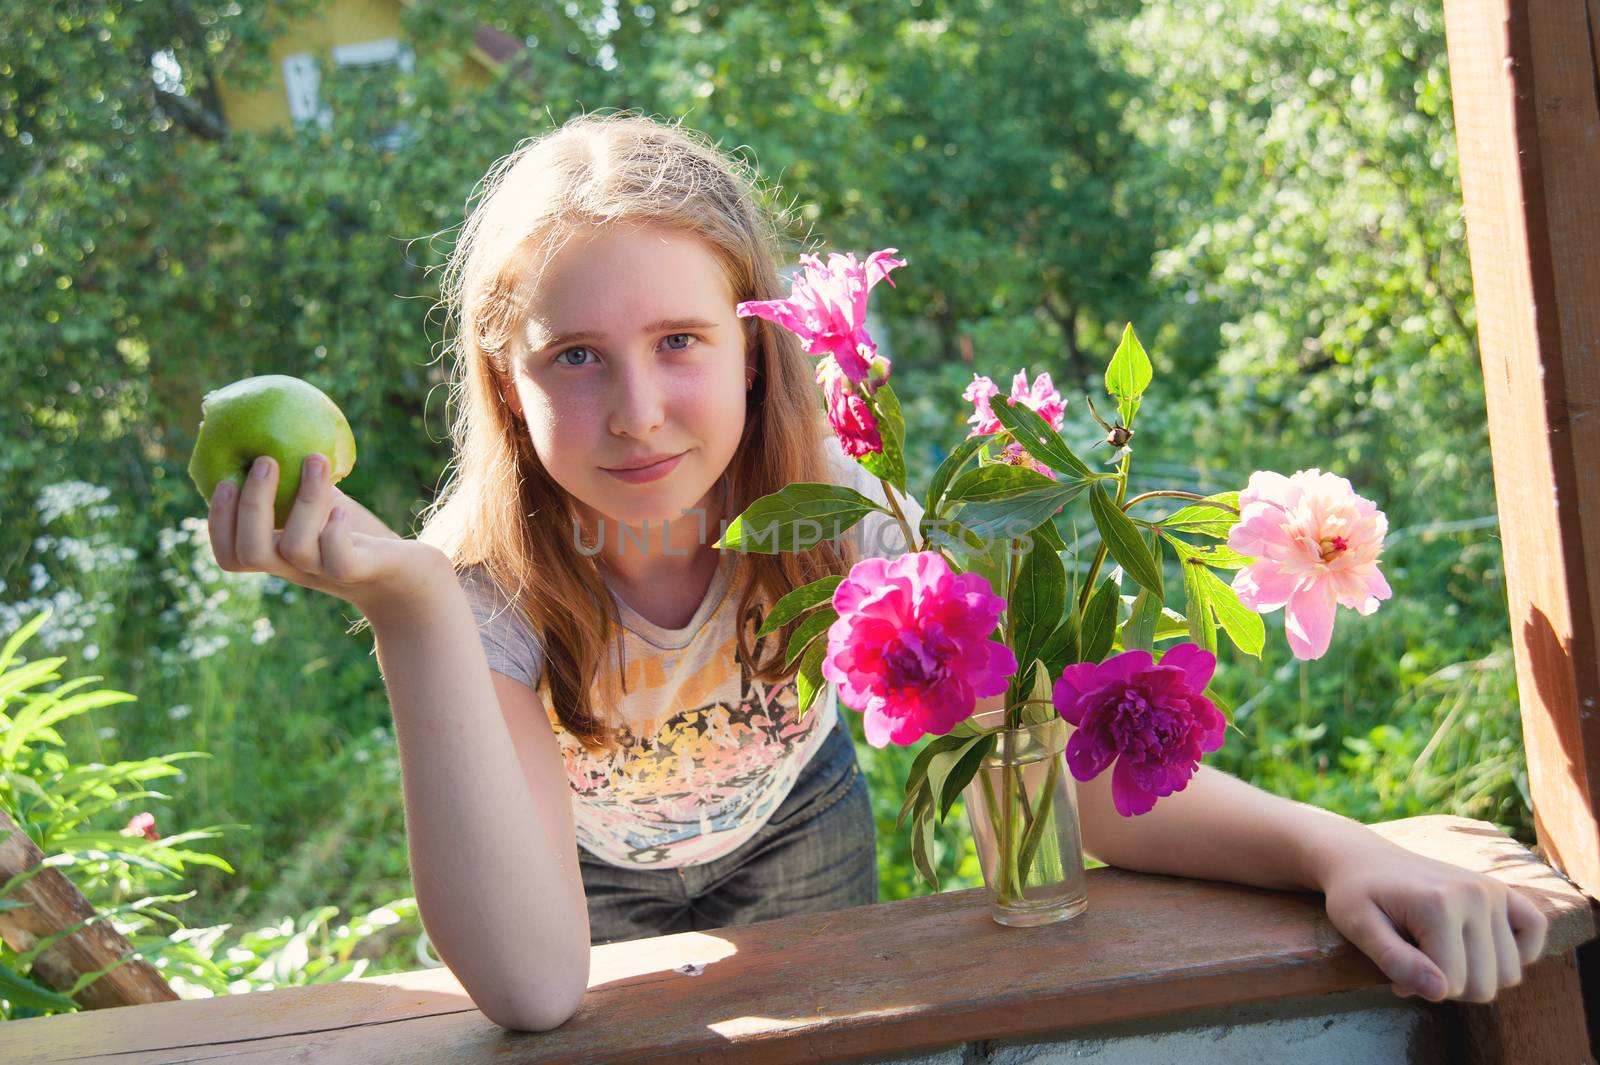  girl with an Apple and a bouquet of peonies at a dacha in the summer